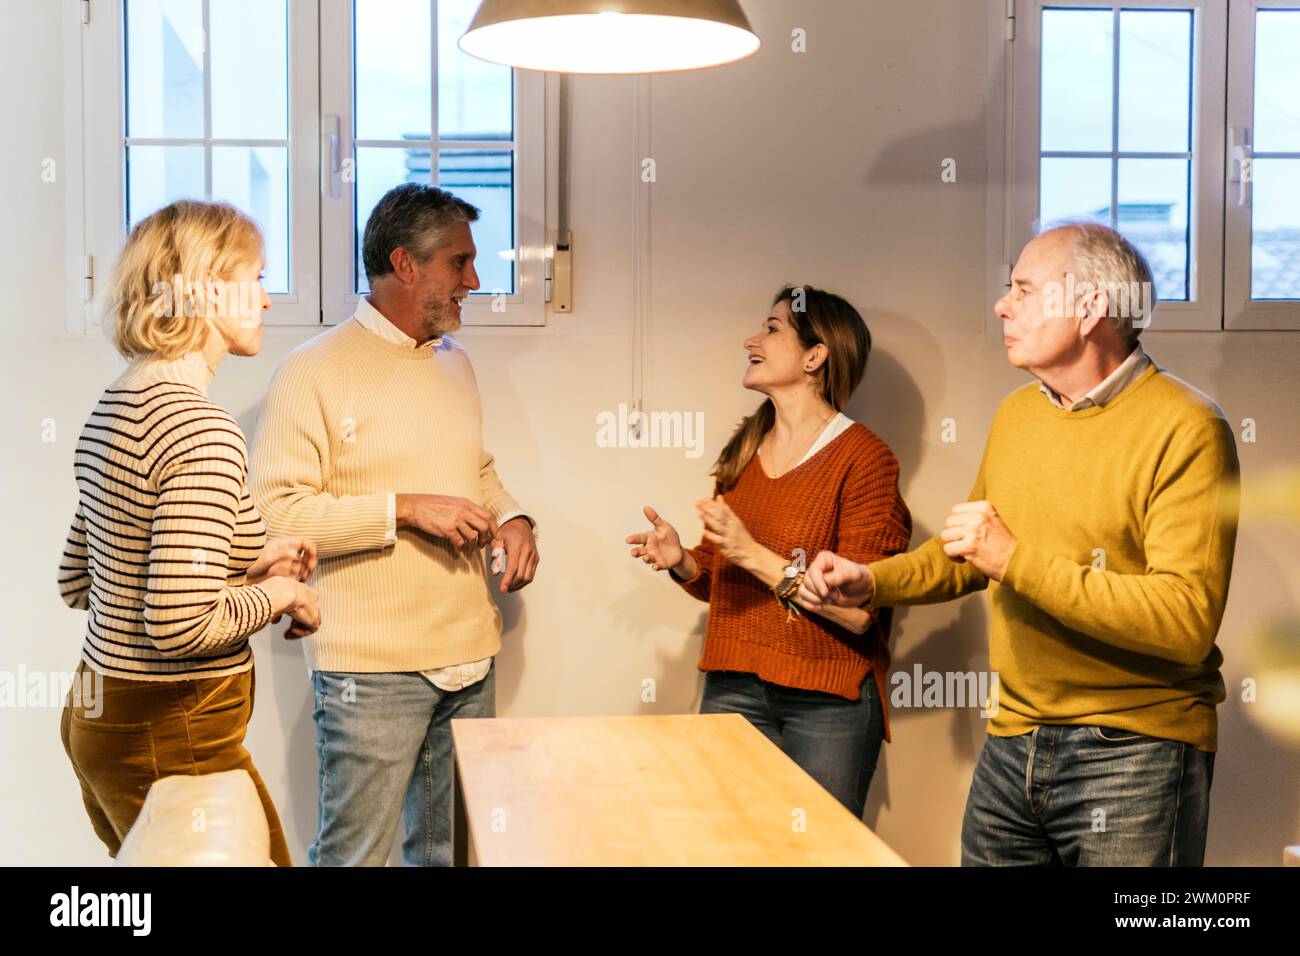 Smiling couples standing together and talking with each other at home Stock Photo